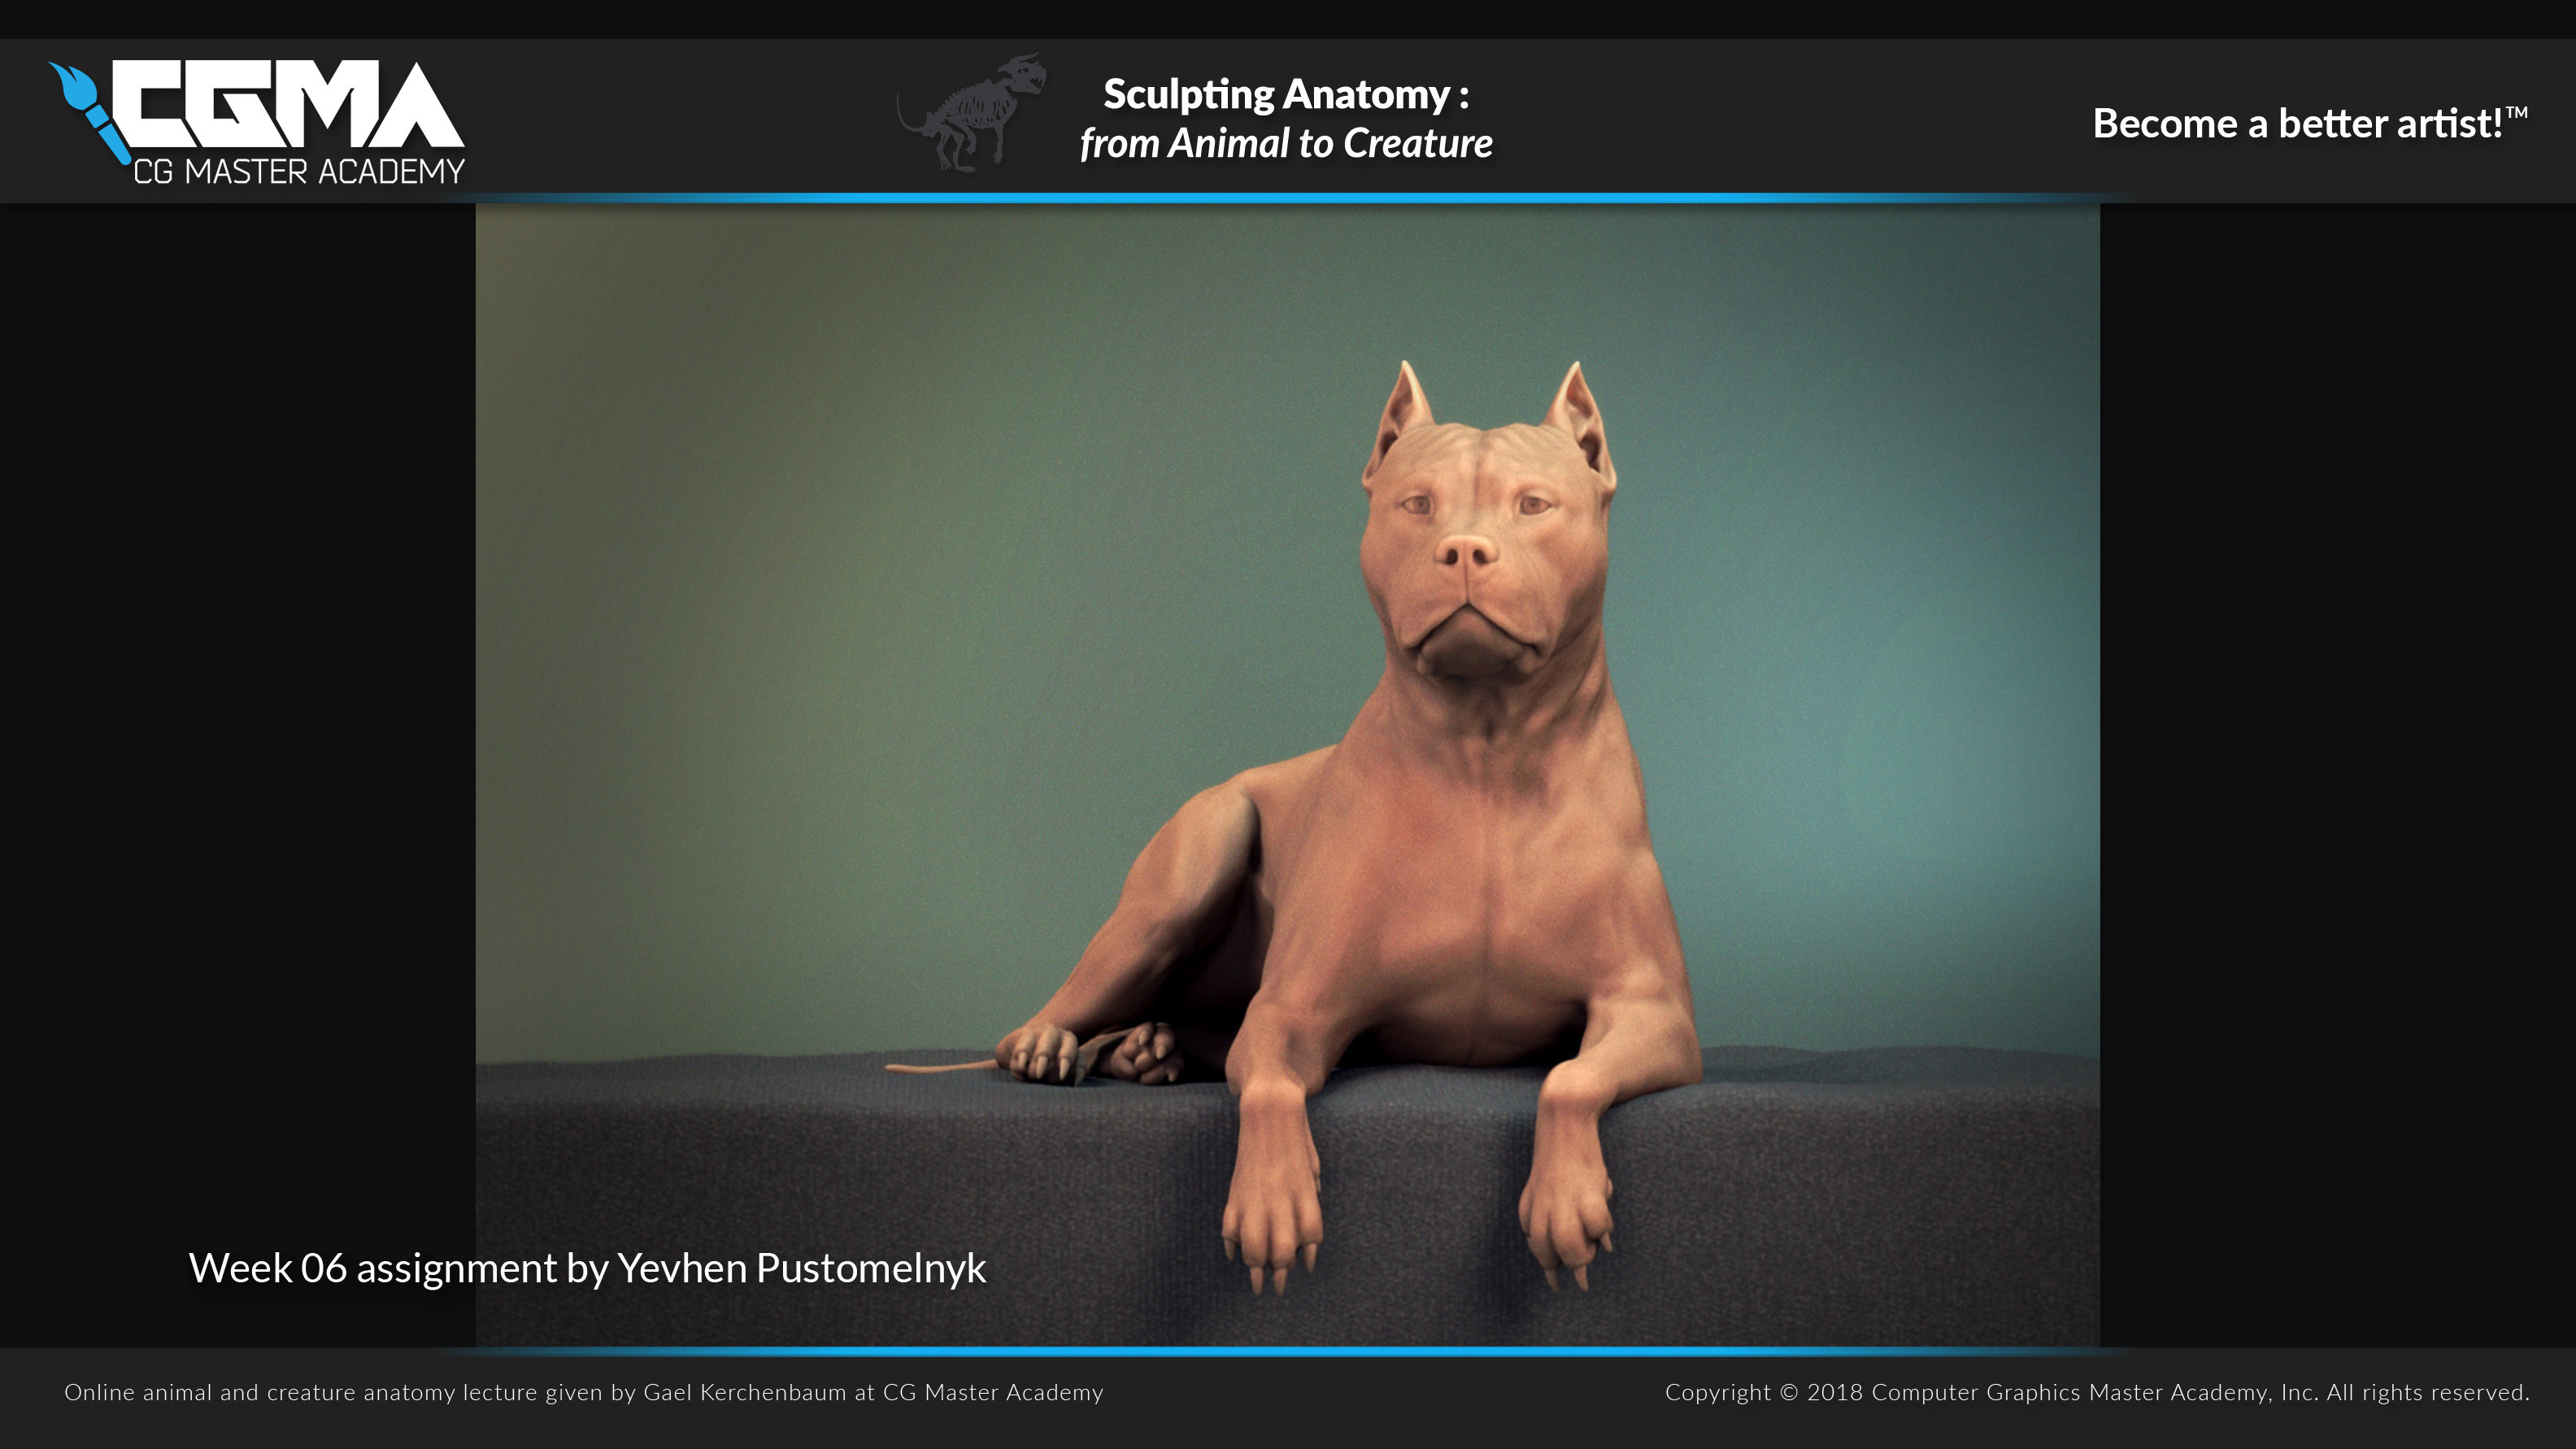 If you want to register yourself for the next classes, follow the link : https://www.cgmasteracademy.com/courses/94-sculpting-anatomy-from-animal-to-creature . The next class will start on the end of January, so do not wait too long before jumping in !